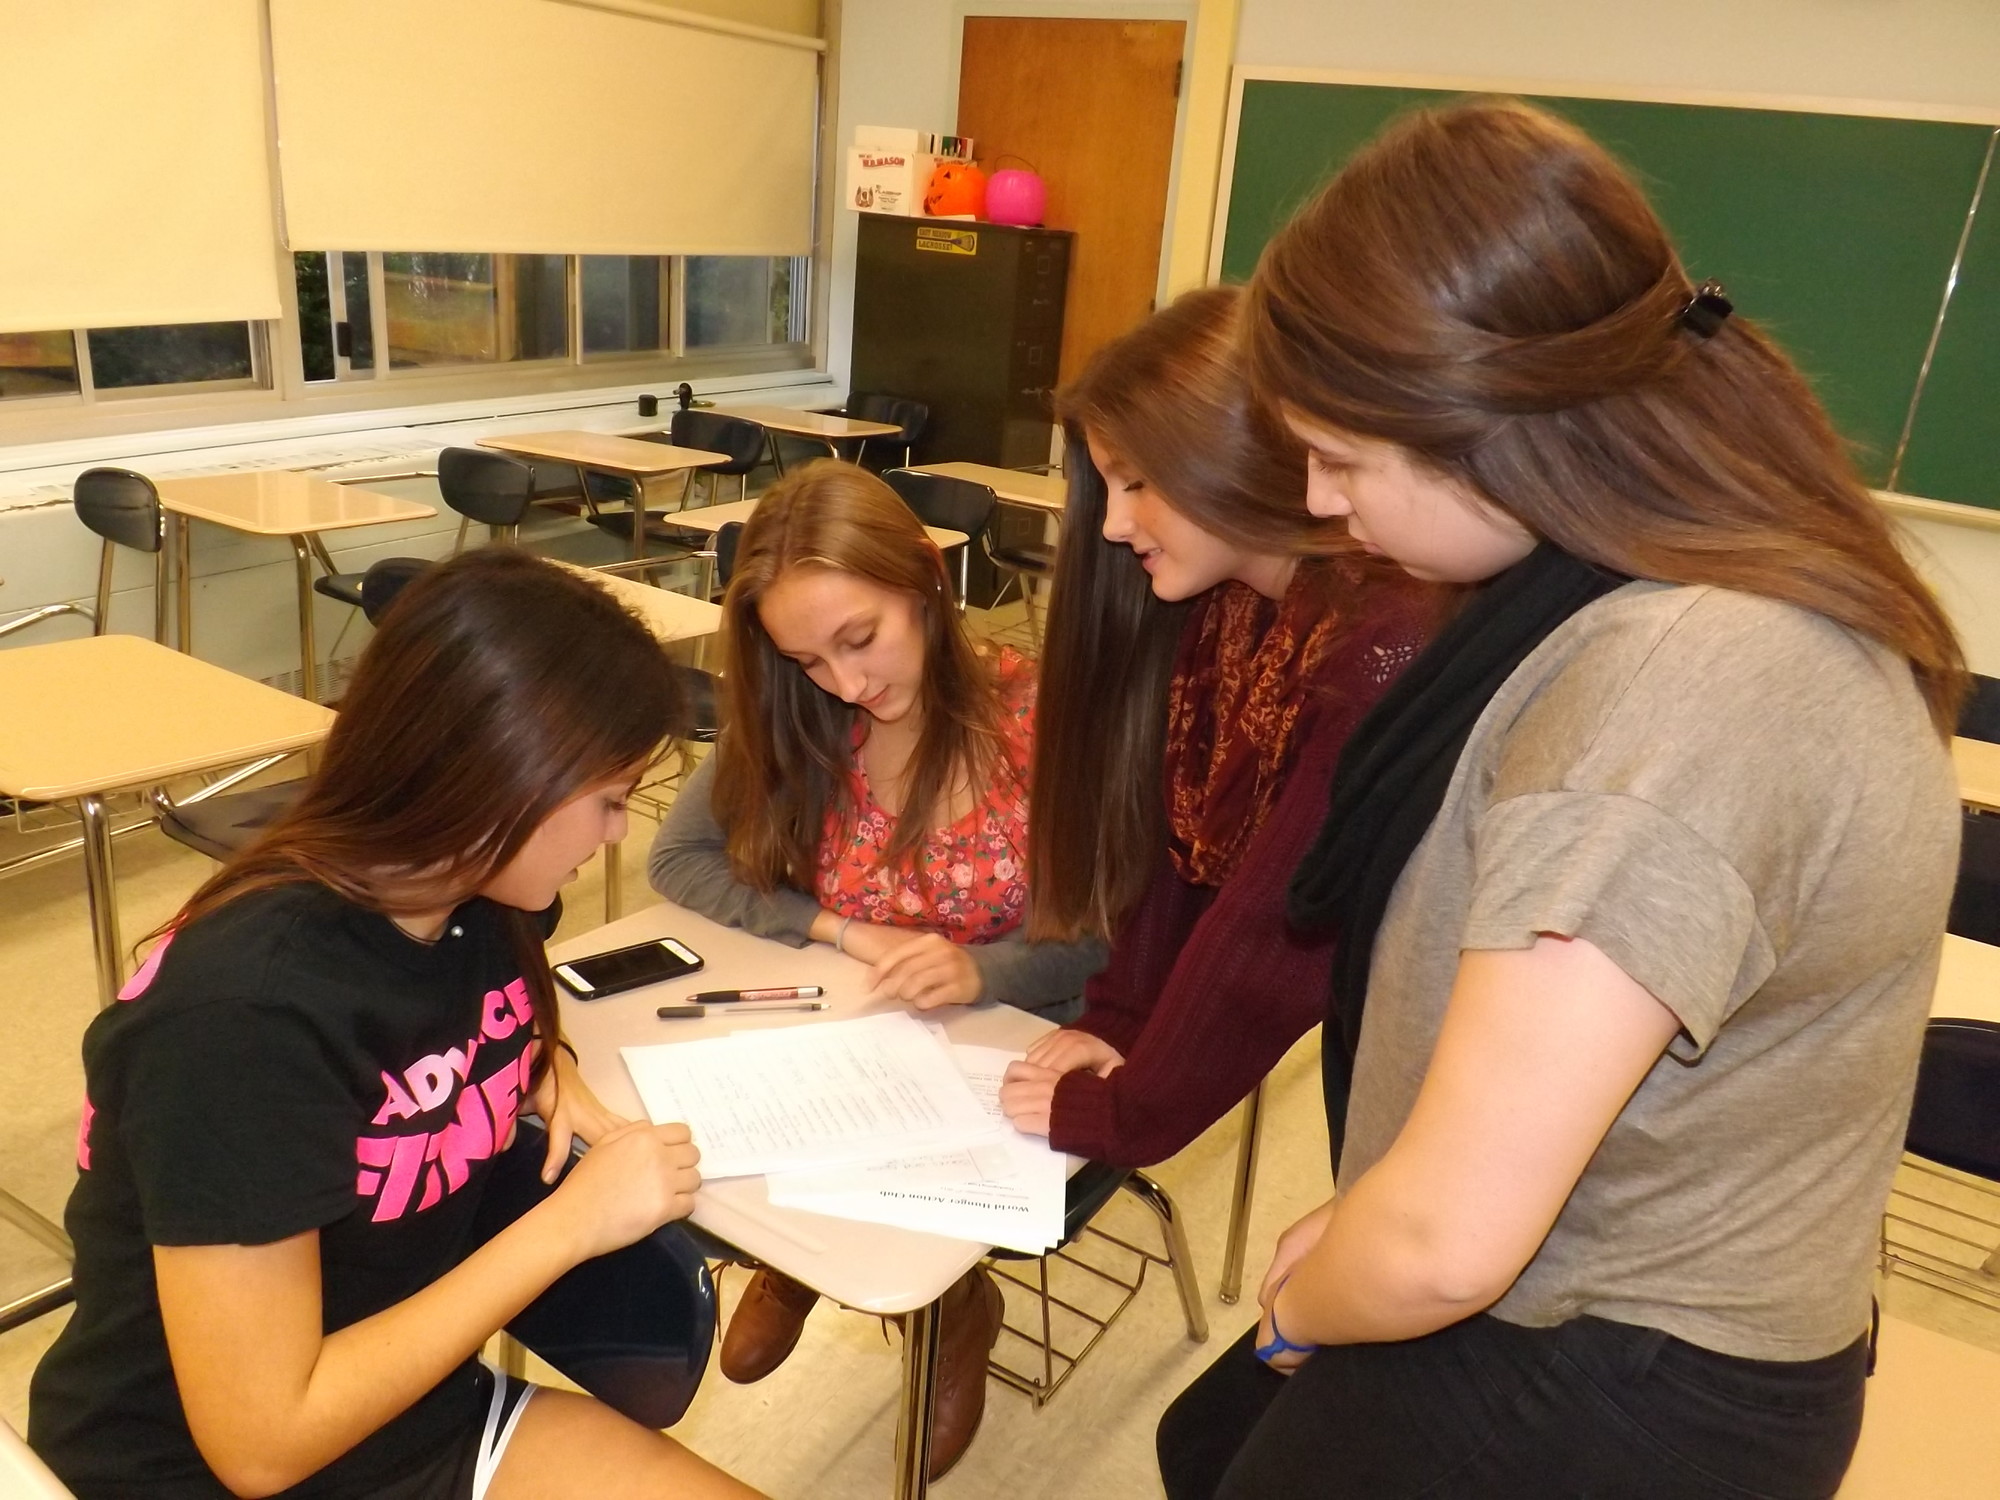 Senior officers Nicole Jaffe, at left, Kerri Percoco, Melissa Conway and Stephanie Lowe, all 17, agreed that volunteering at local soup kitchens has been an “eye-opening” experience.